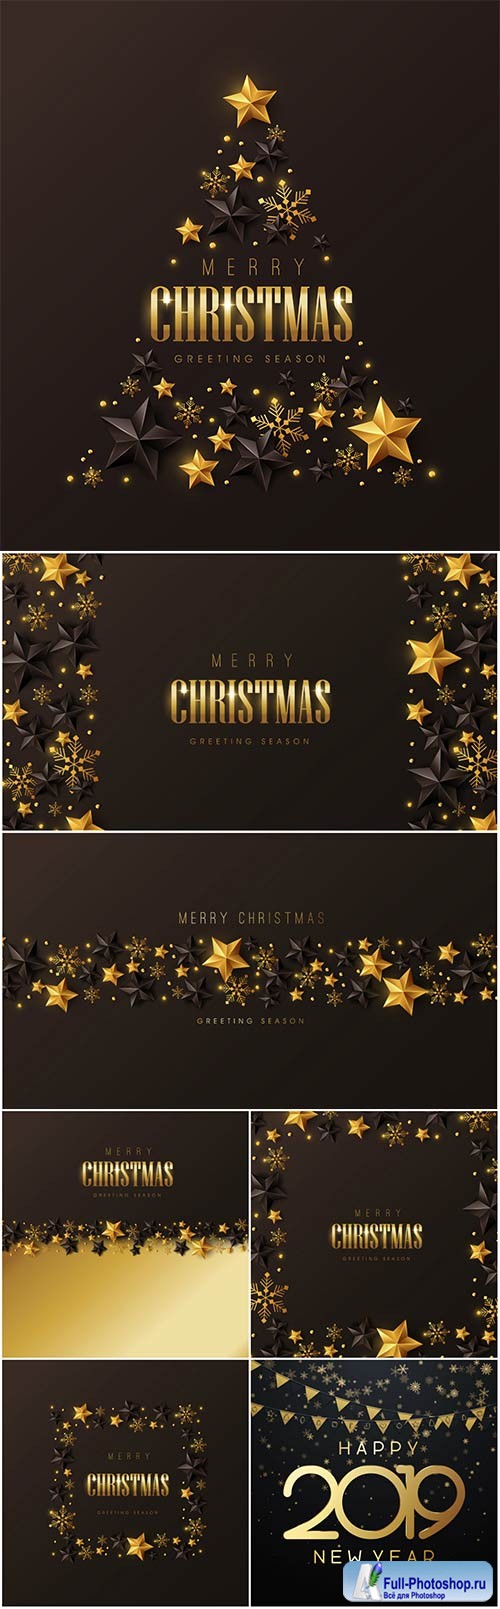 Christmas and New Year vector backgrounds with golden decor